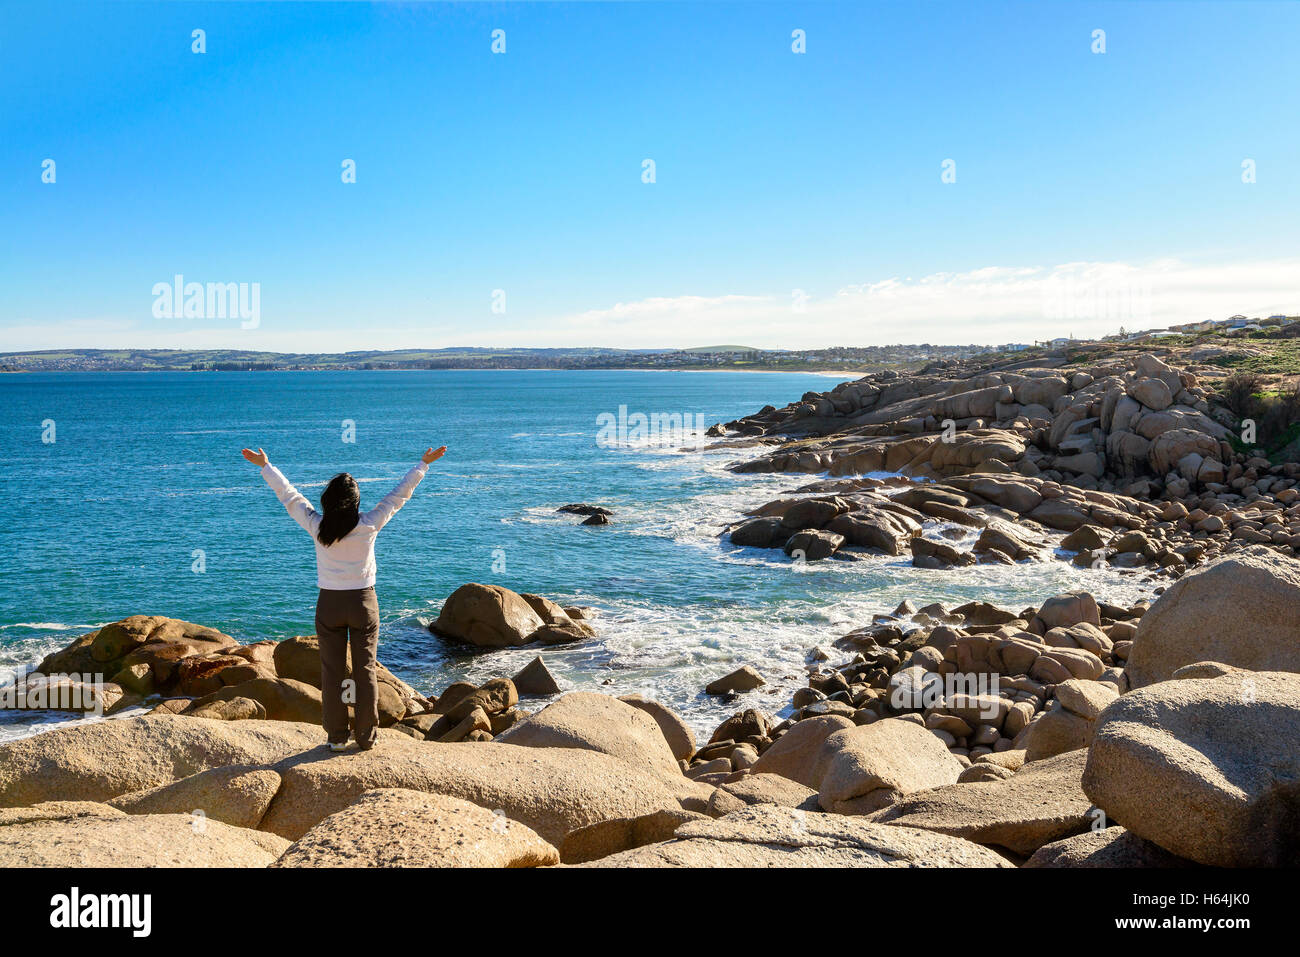 Woman standing at the edge of the rock and looking into the sea at Port Elliot, South Australia Stock Photo